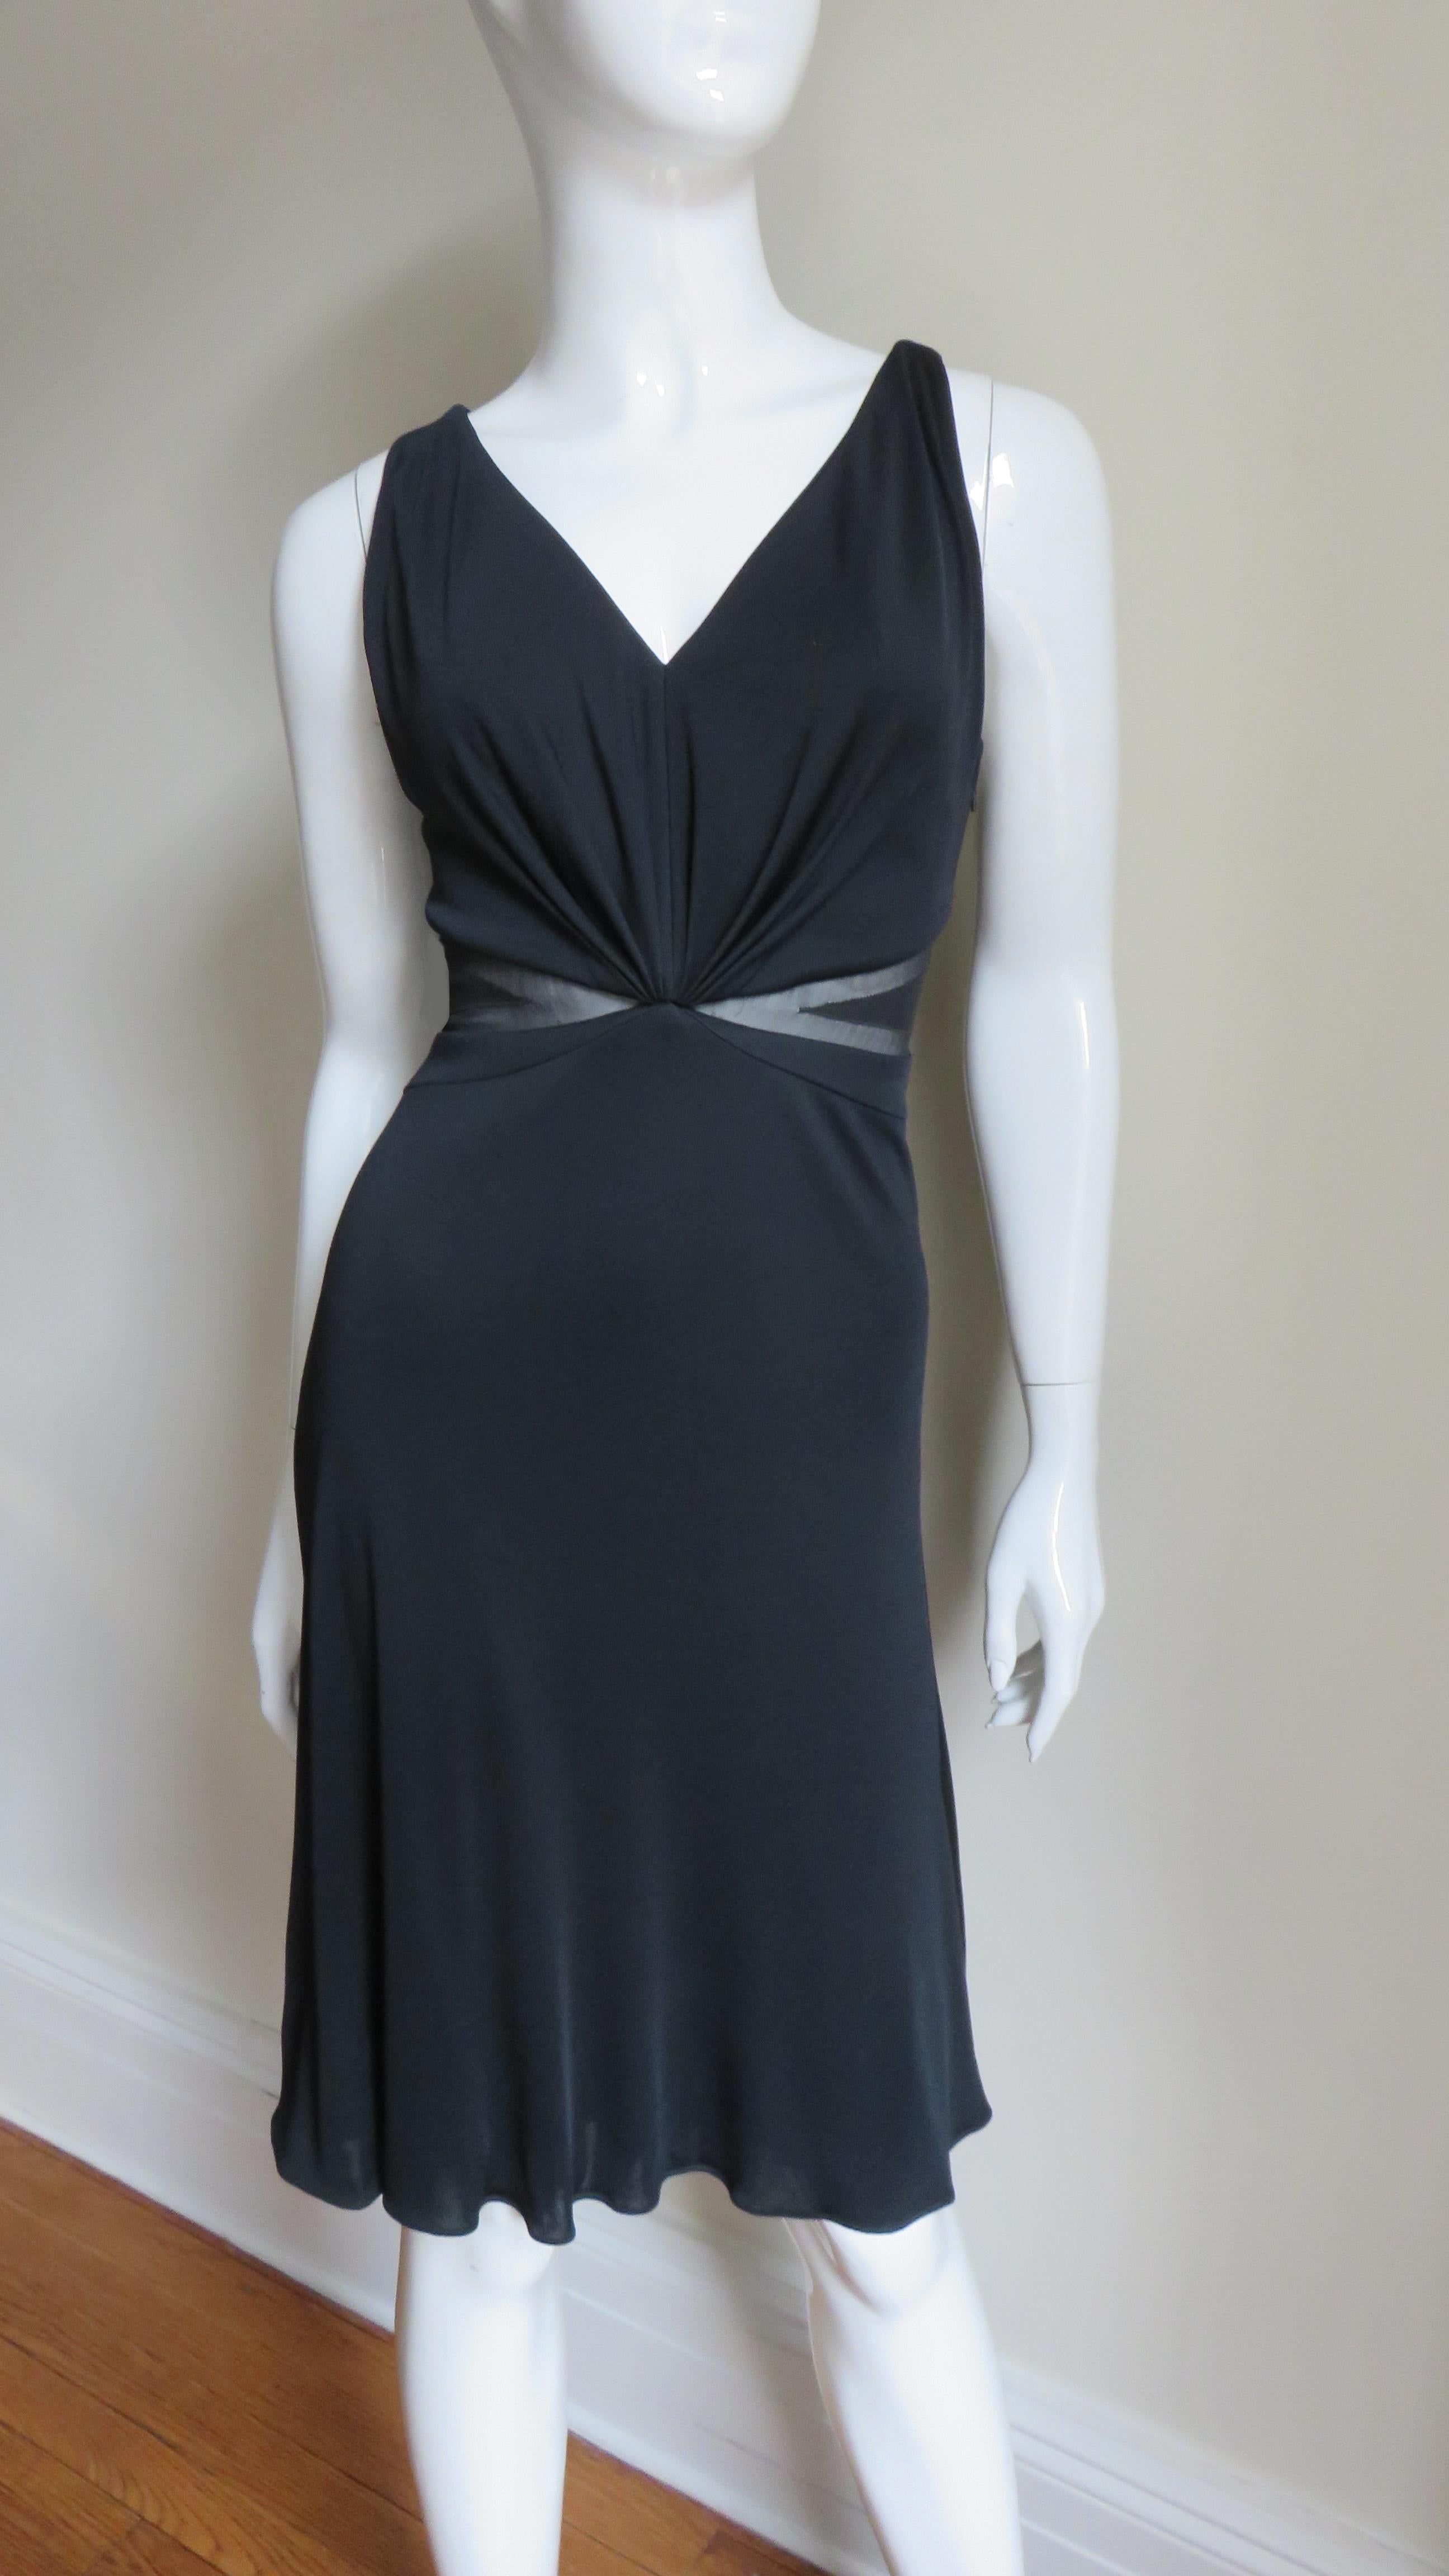 A beautiful black fine stretch silk dress from Versace. It is sleeveless with a V neckline front and back plus 1/2